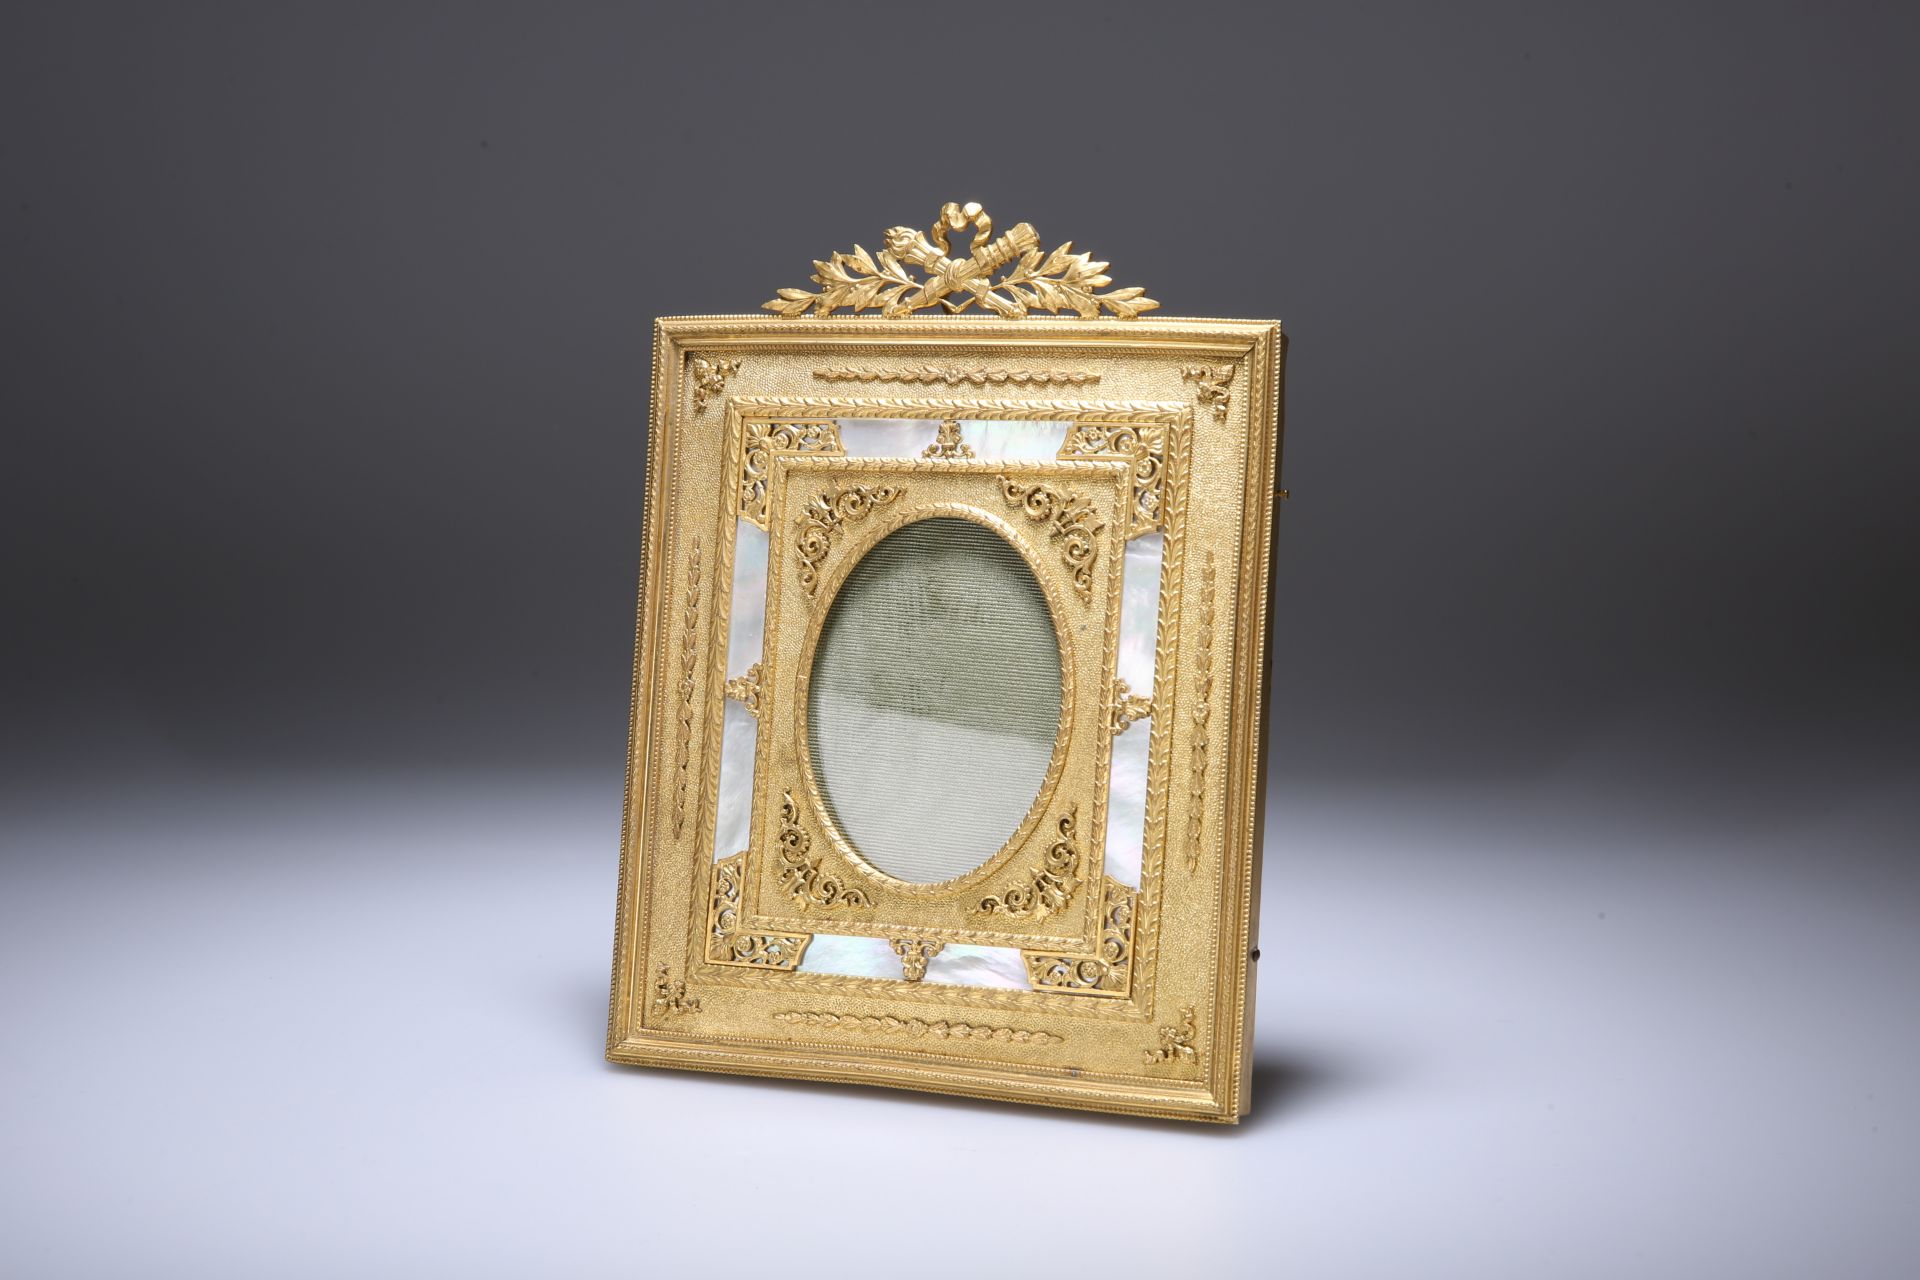 A FINE FRENCH ORMOLU AND MOTHER-OF-PEARL PHOTOGRAPH FRAME